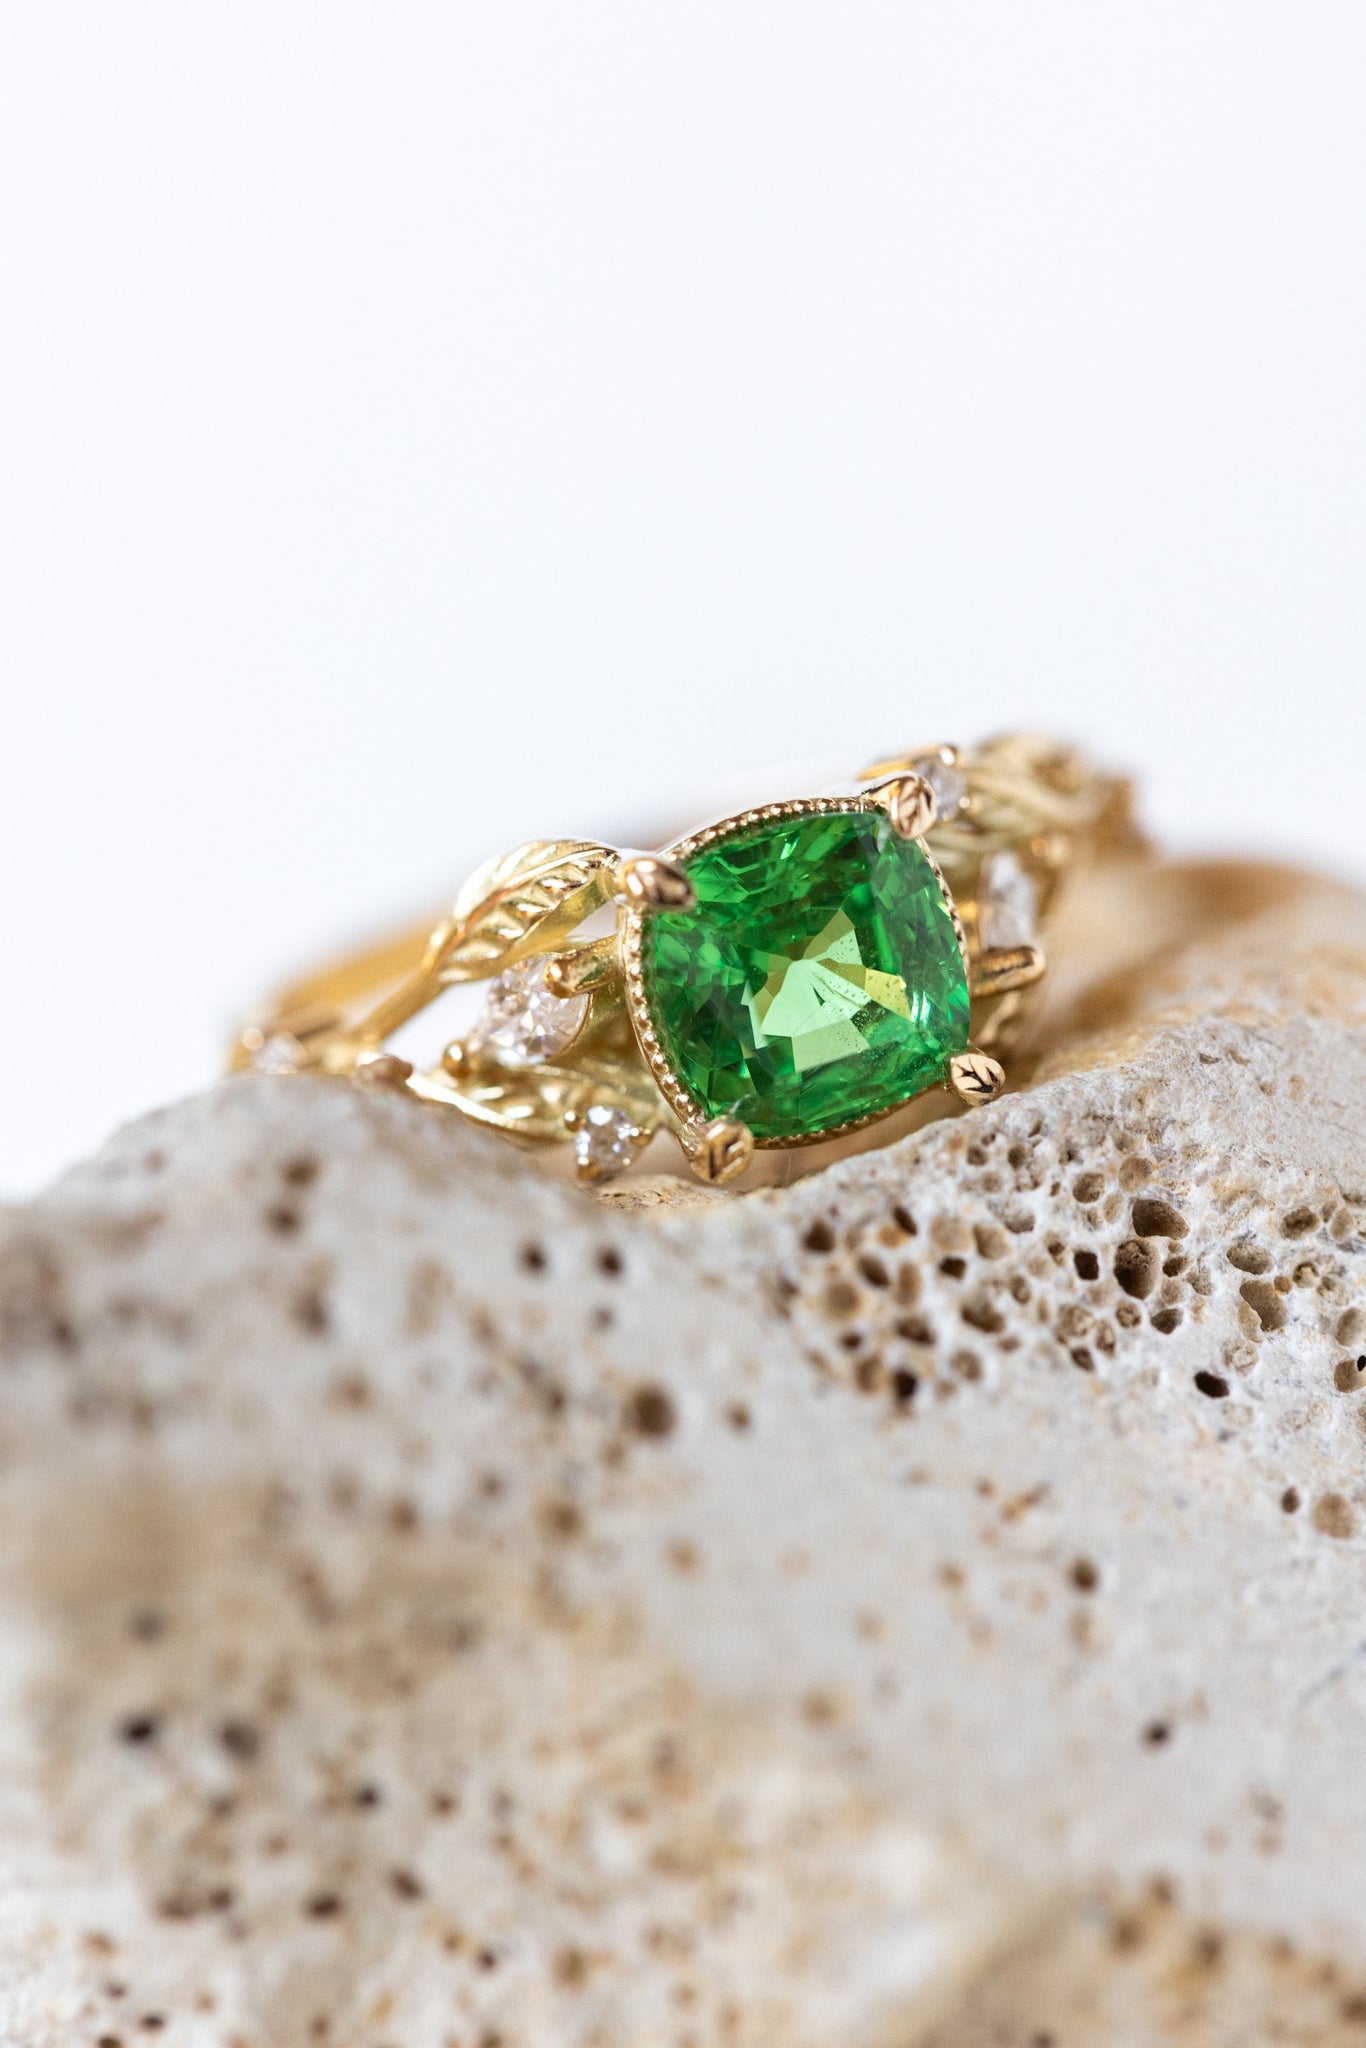 Tsavorite garnet engagement ring, gold ring with leaves and diamonds / Patricia - Eden Garden Jewelry™